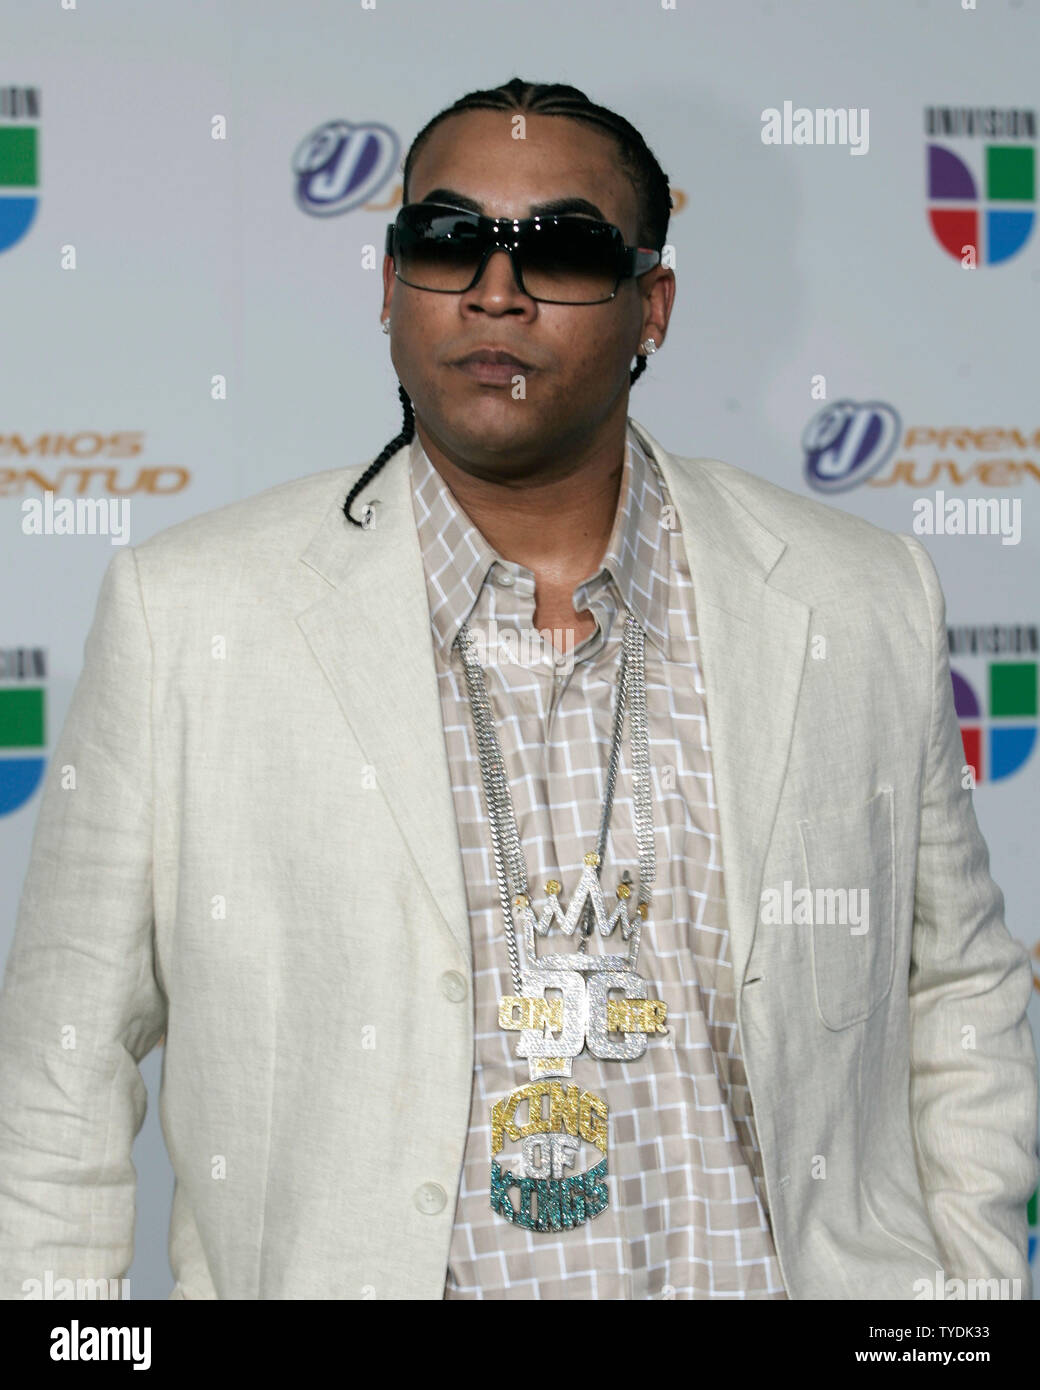 Don Omar arrives on the red carpet for the 2006 Premios Juventud Awards at the University of Miami BankUnited Center in Coral Gables, Florida on July 13, 2006. (UPI Photo/Michael Bush) Stock Photo